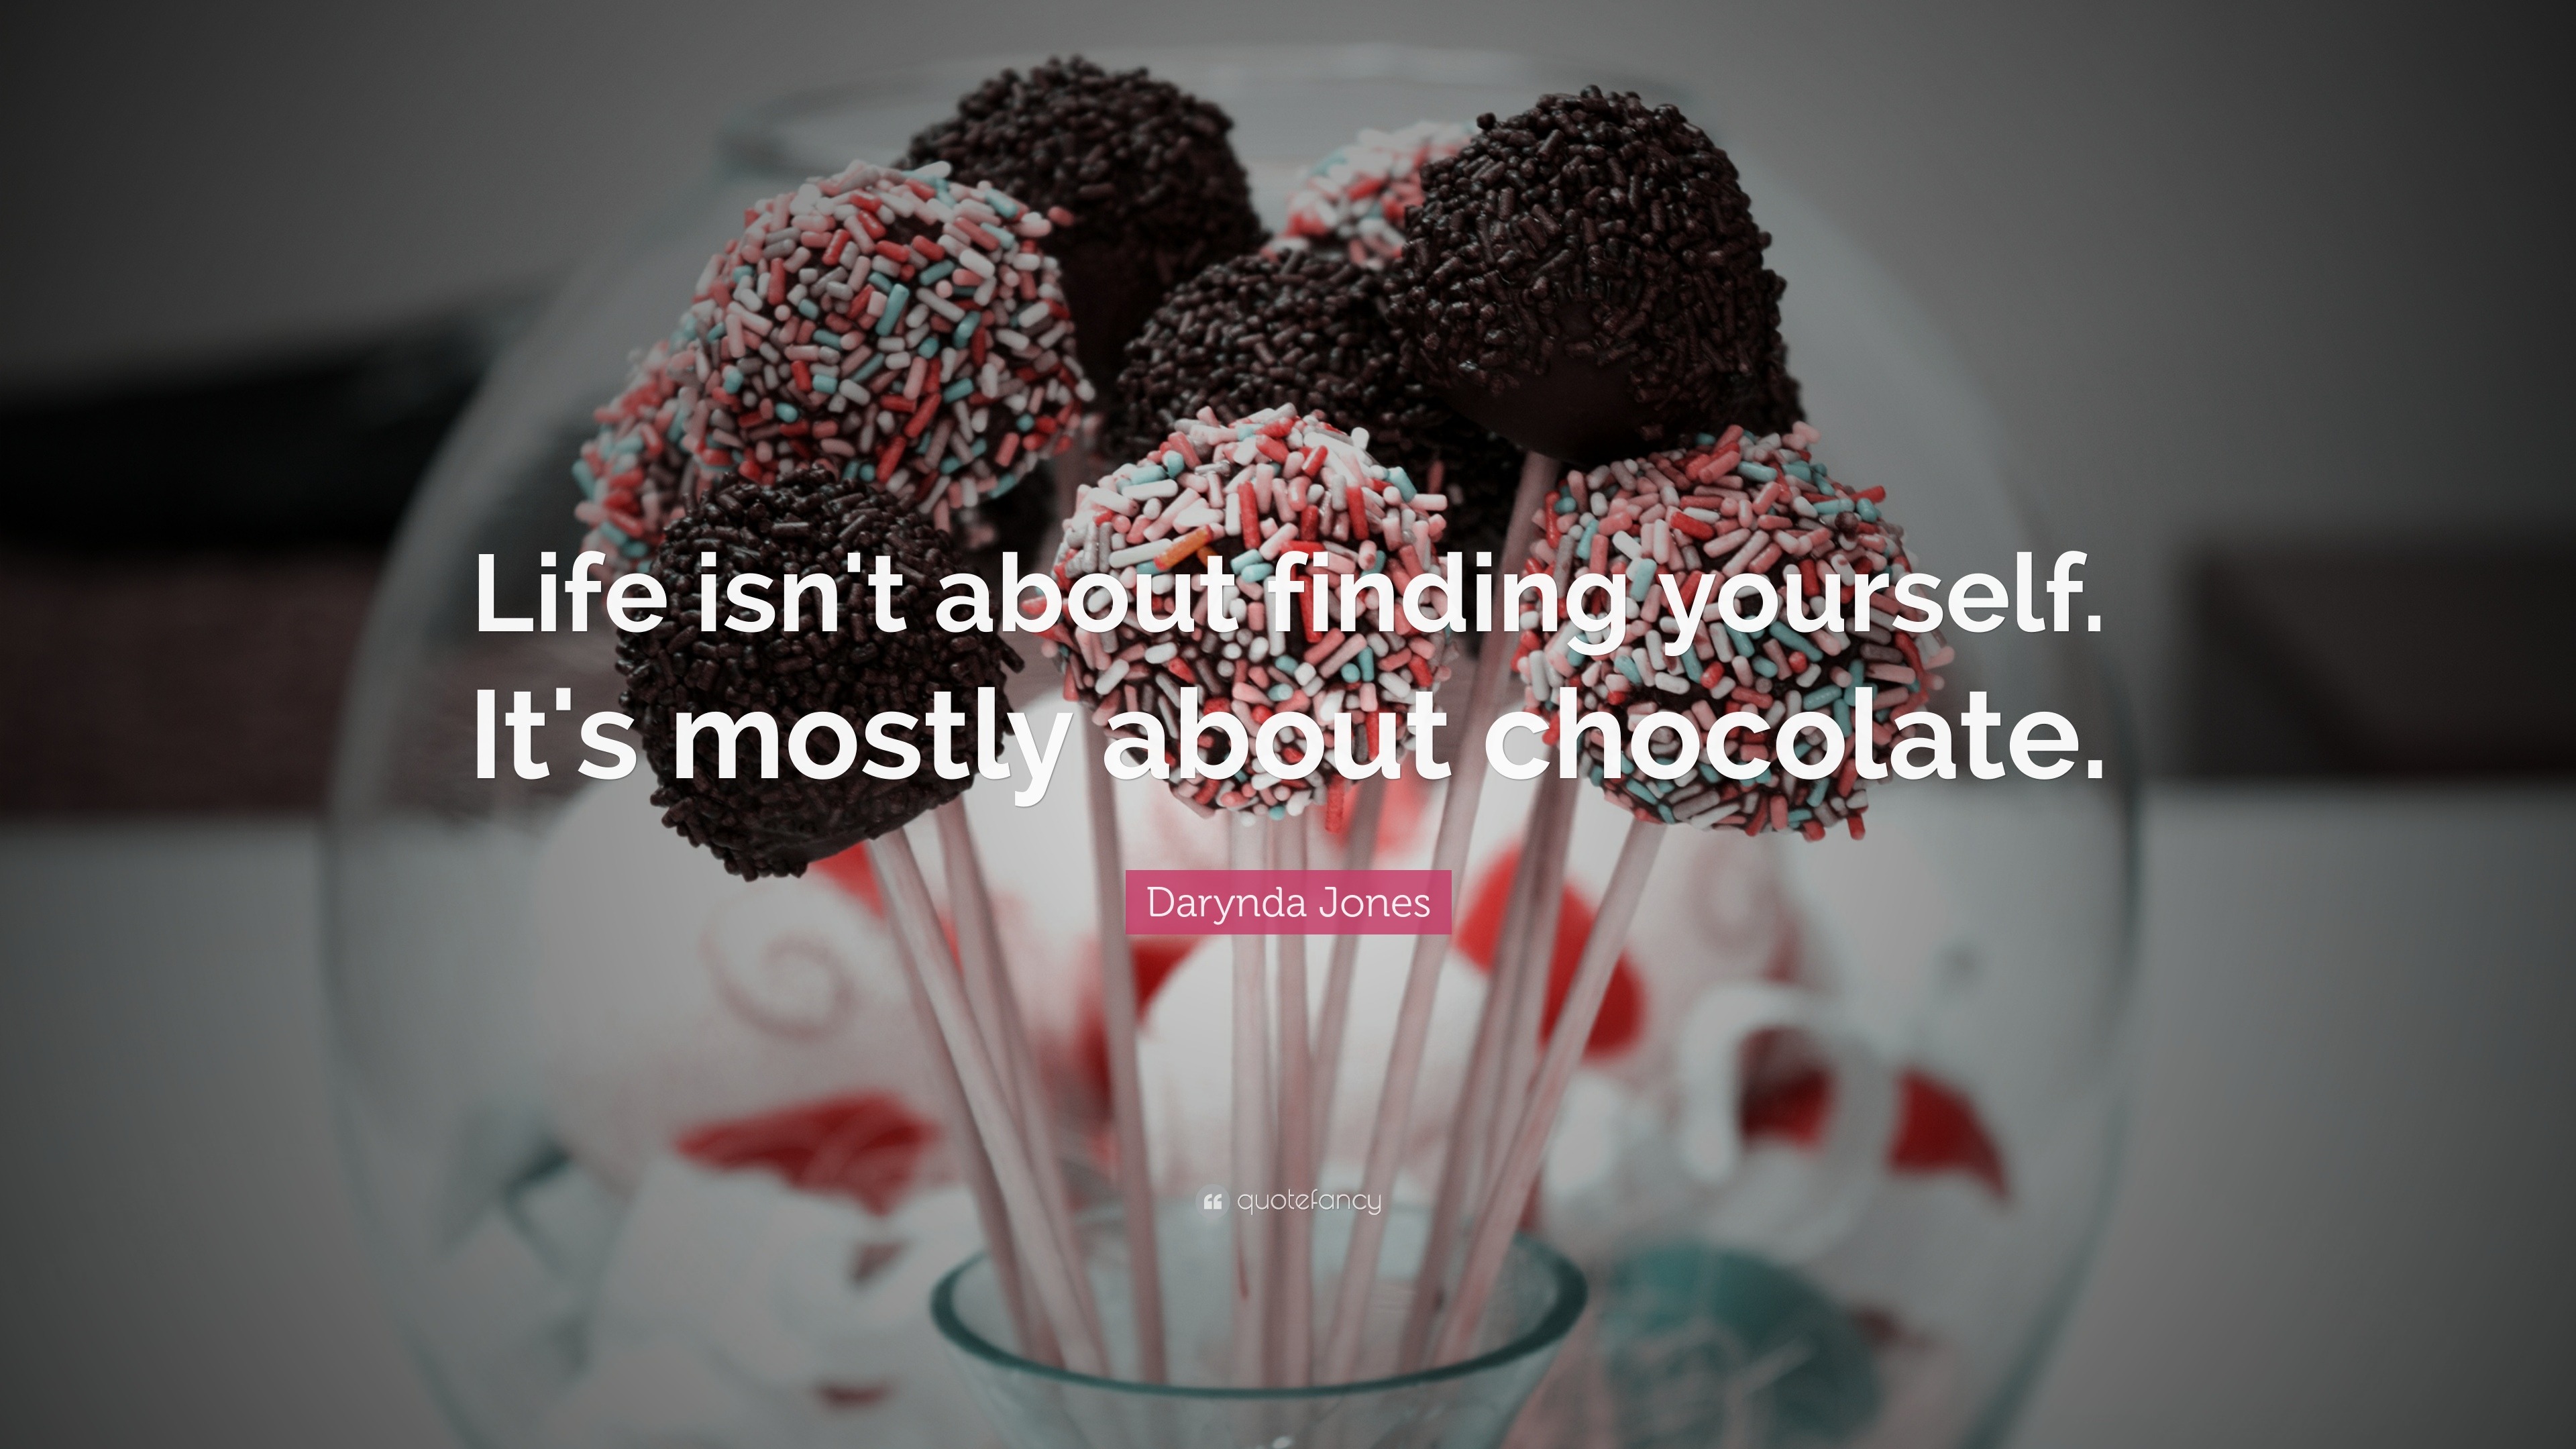 National Chocolate Day Quotes “Life isn t about finding yourself It s mostly